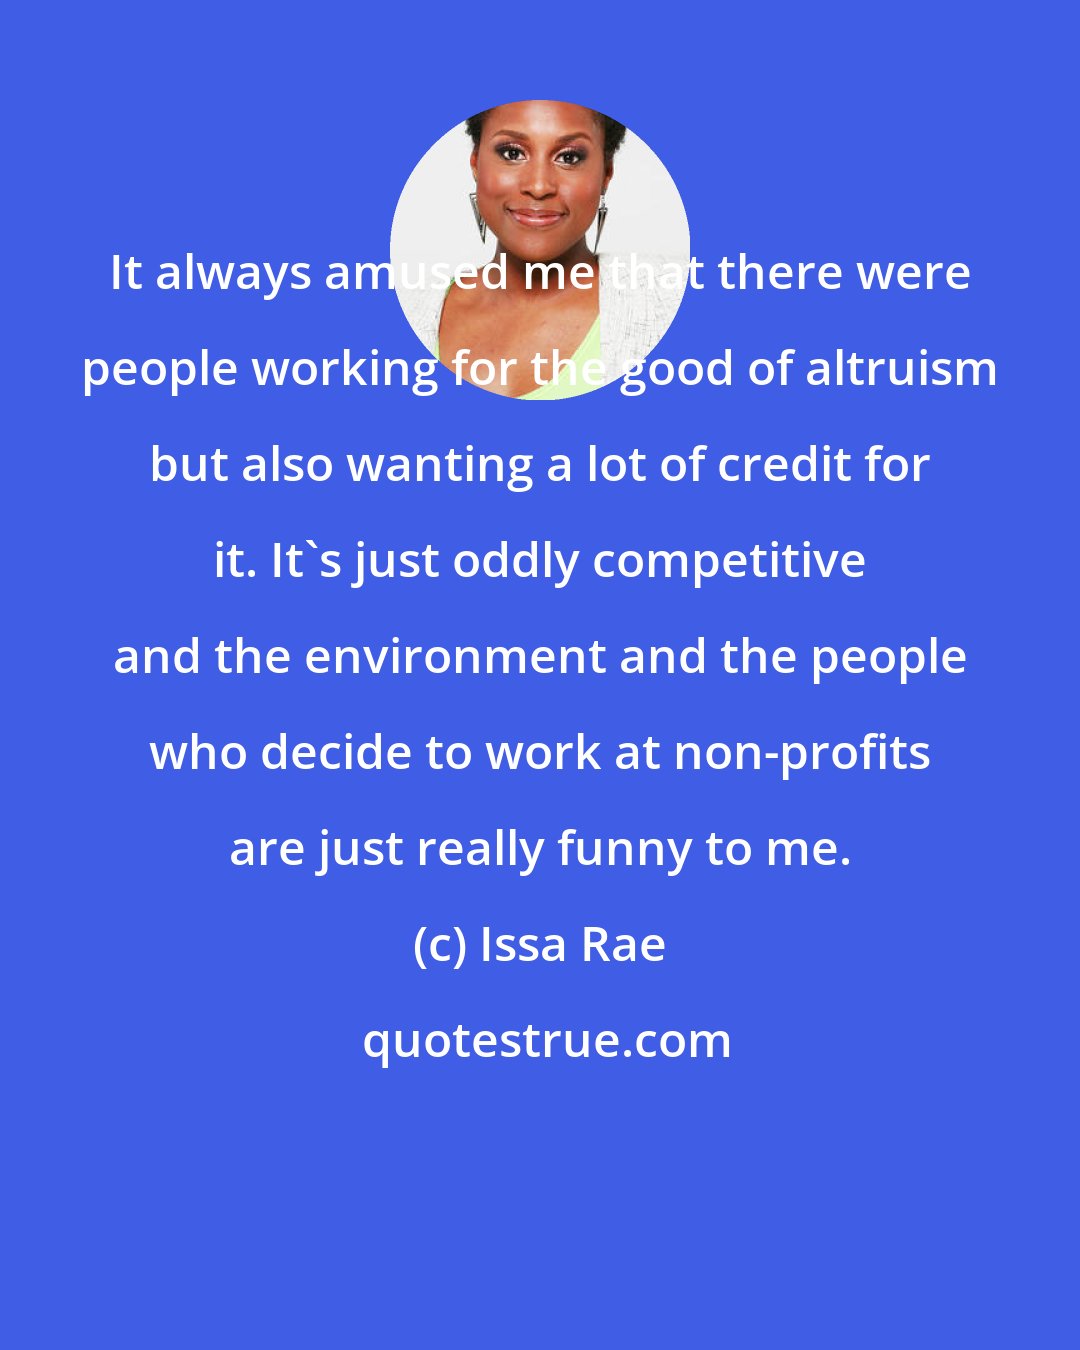 Issa Rae: It always amused me that there were people working for the good of altruism but also wanting a lot of credit for it. It's just oddly competitive and the environment and the people who decide to work at non-profits are just really funny to me.